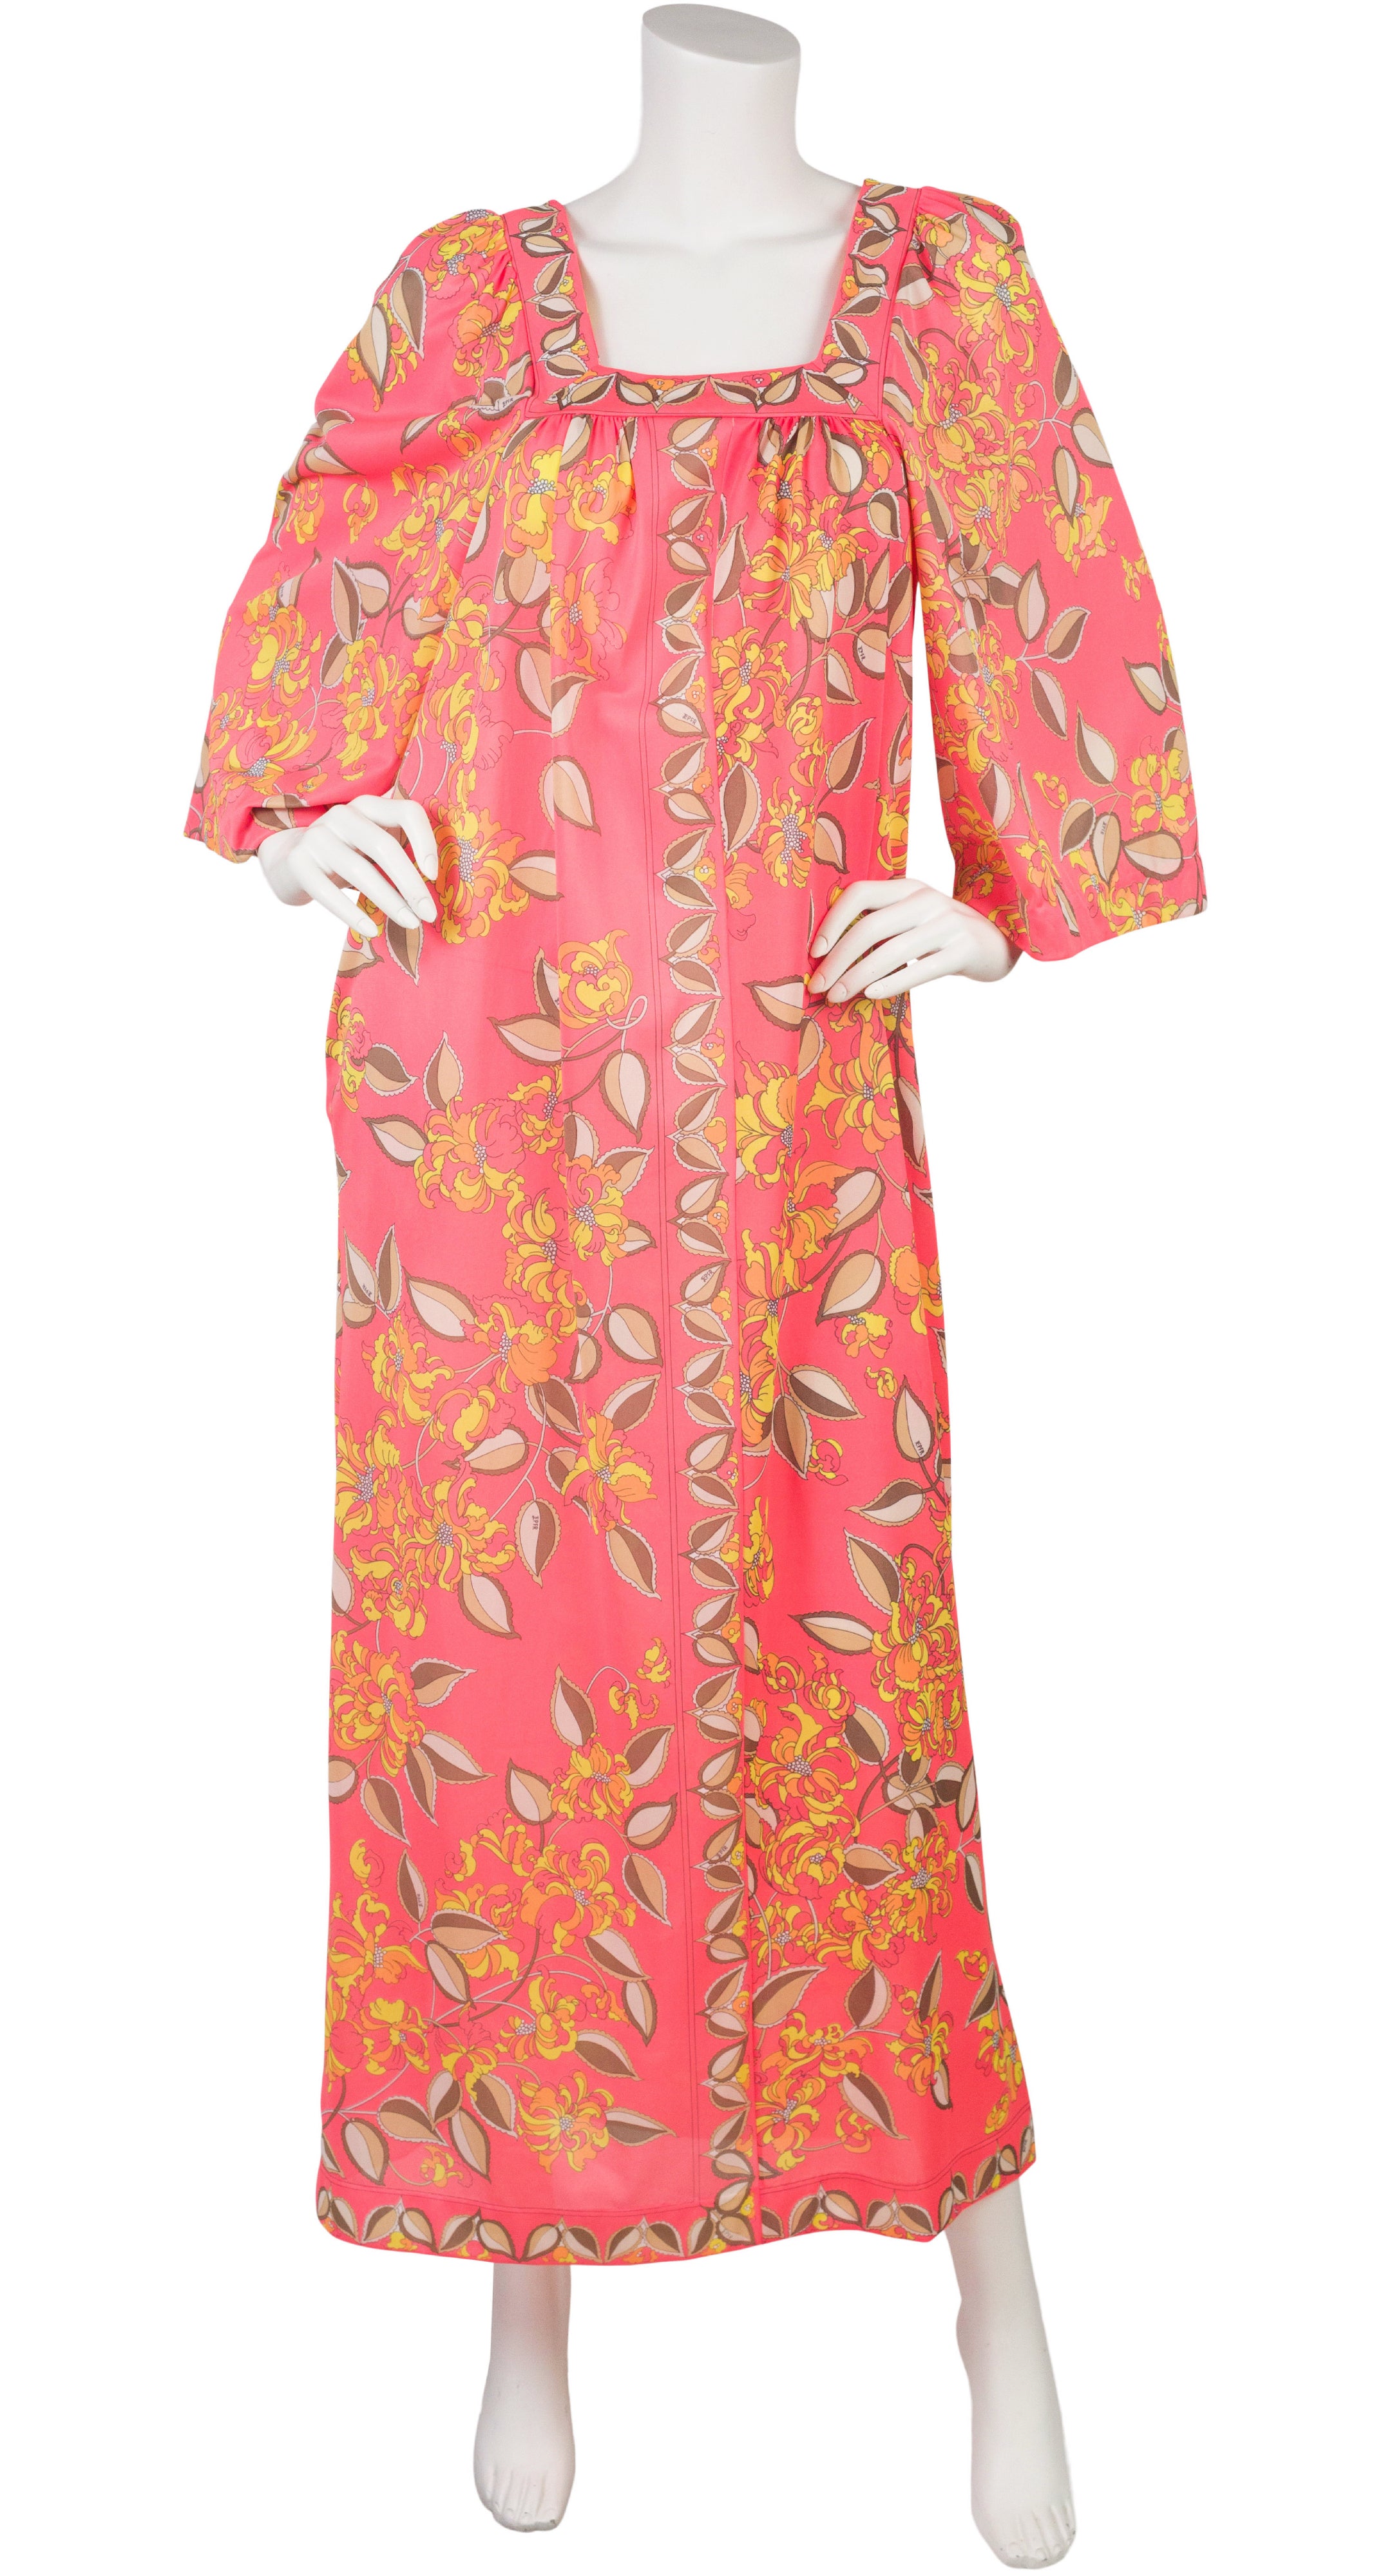 1960s Floral Neon Pink Night Dress